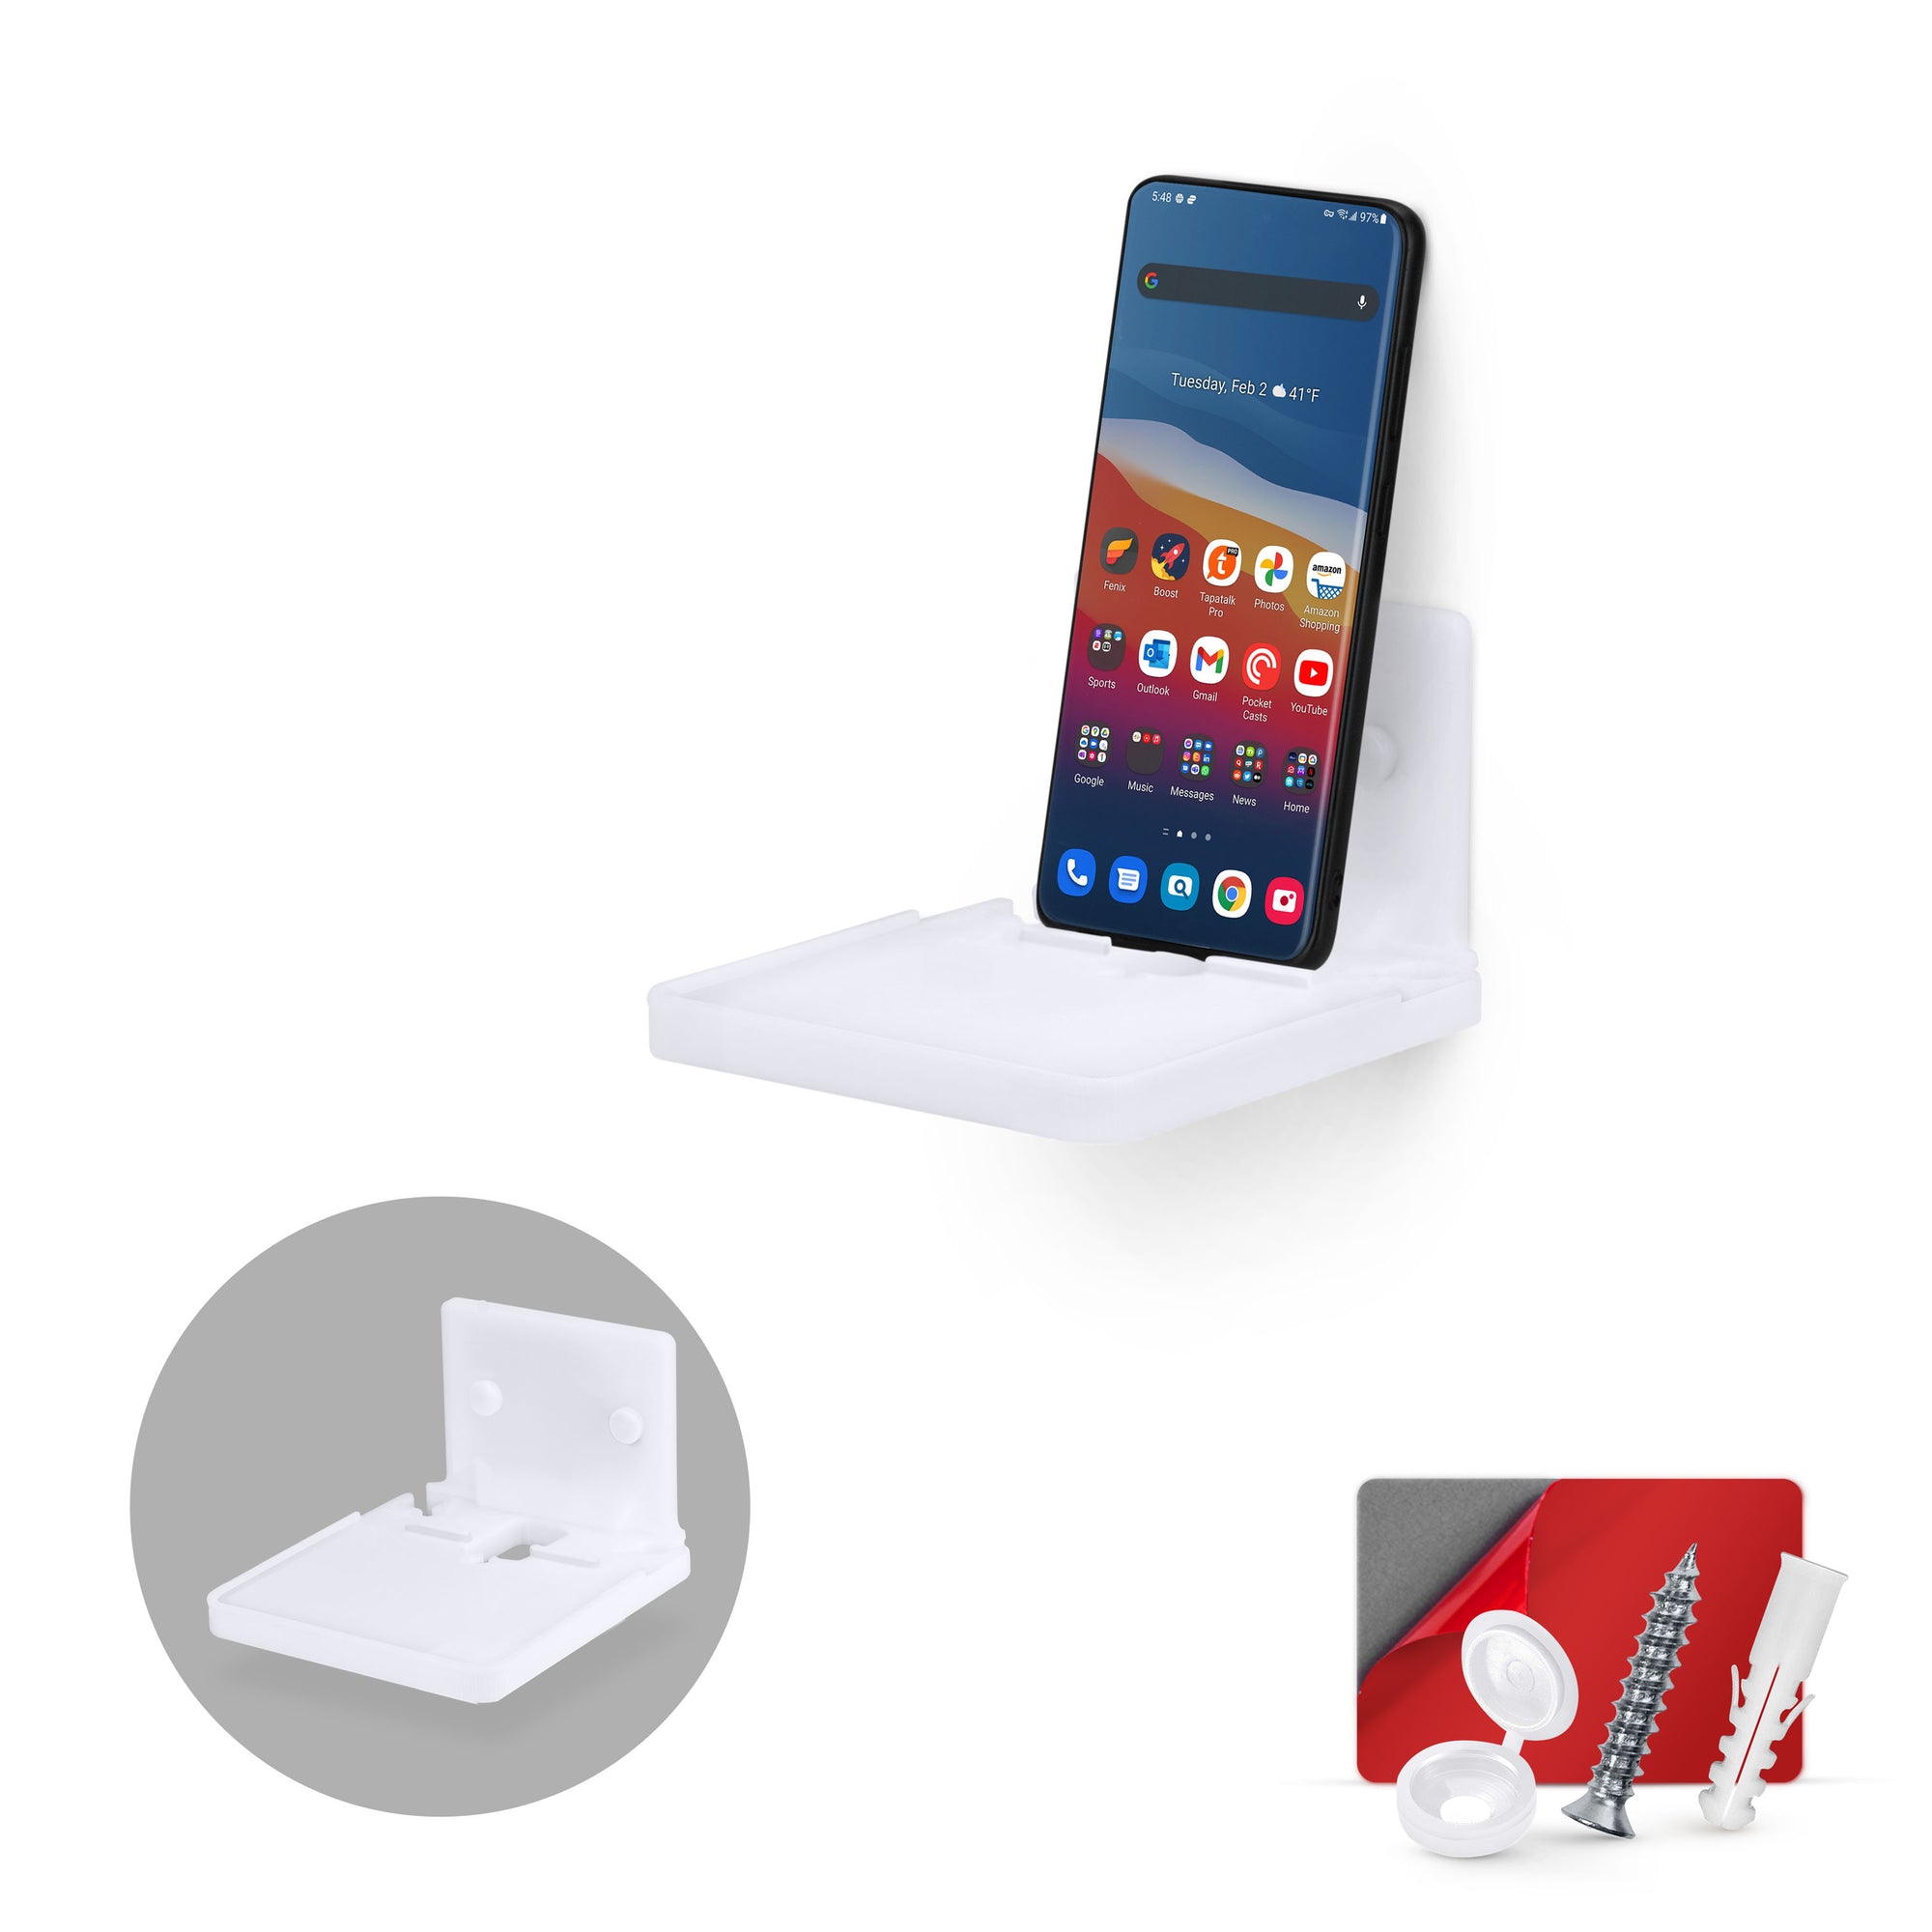 4" Small Wall Mount Shelf with Tablet & Phone Holder, Use for Baby Monitors, Bedside, Decor, Cameras, Speakers & More, Adhesive & Screw-in